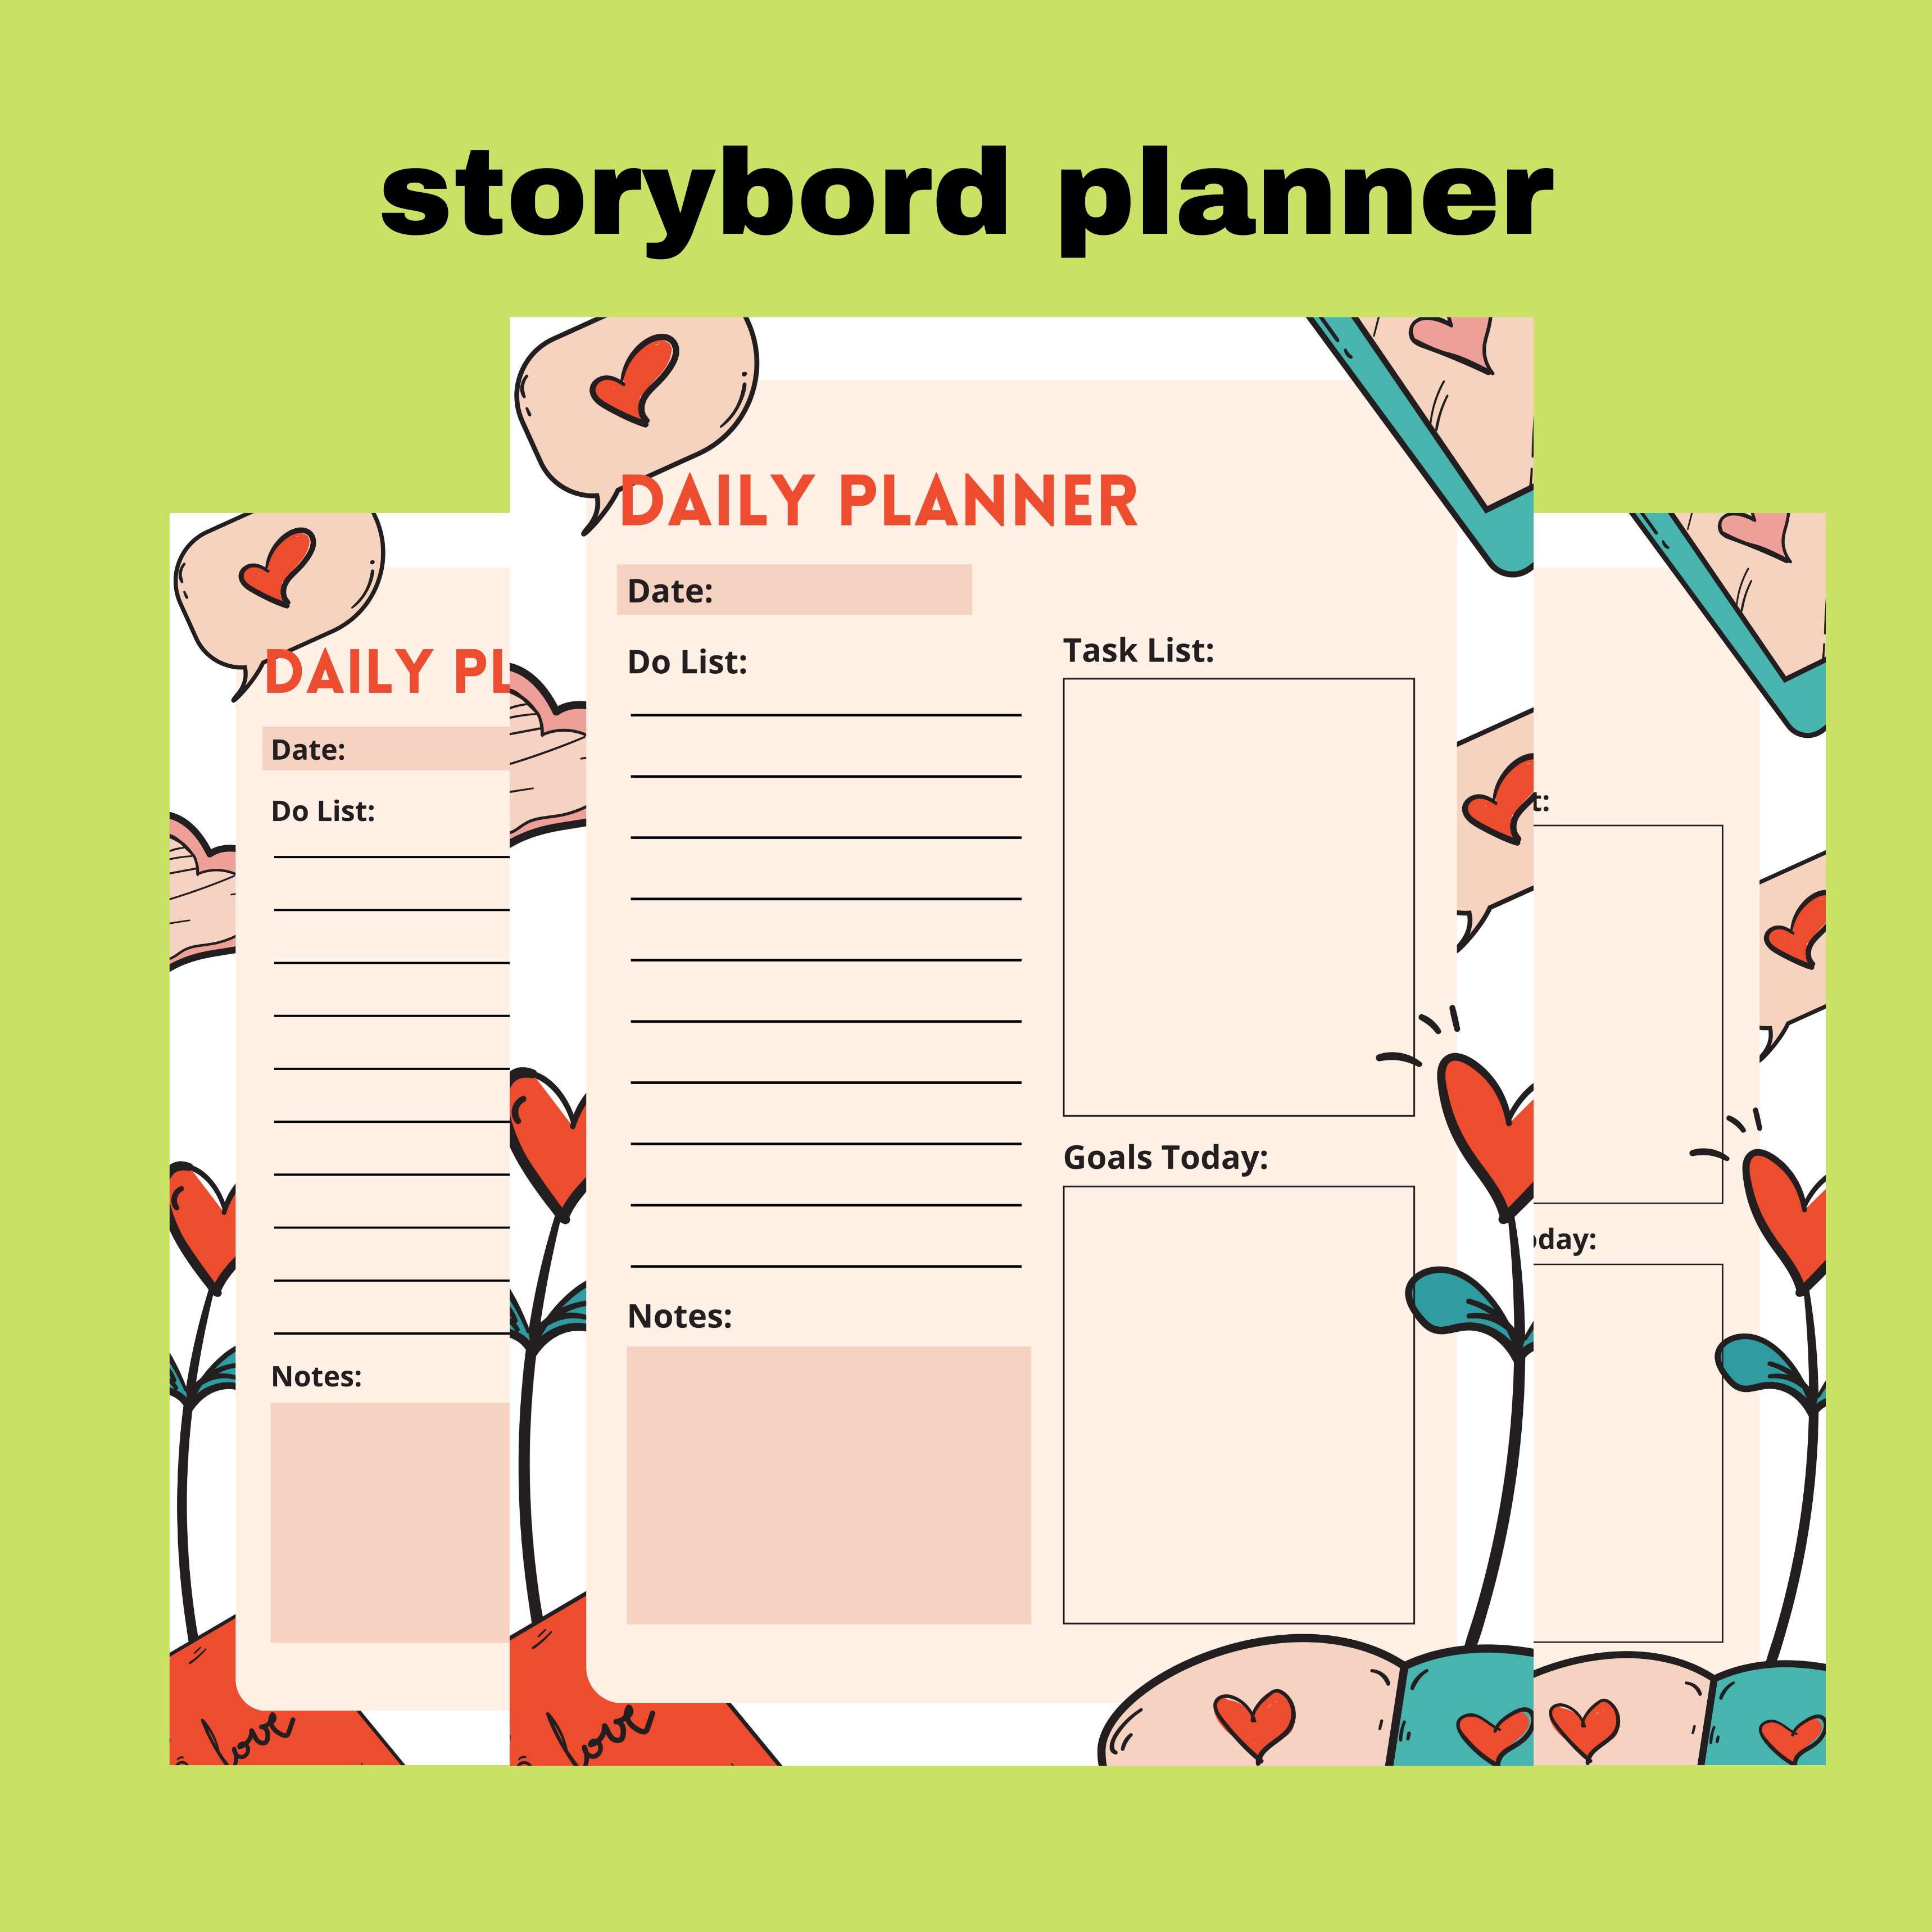 storybord planner template cover image.